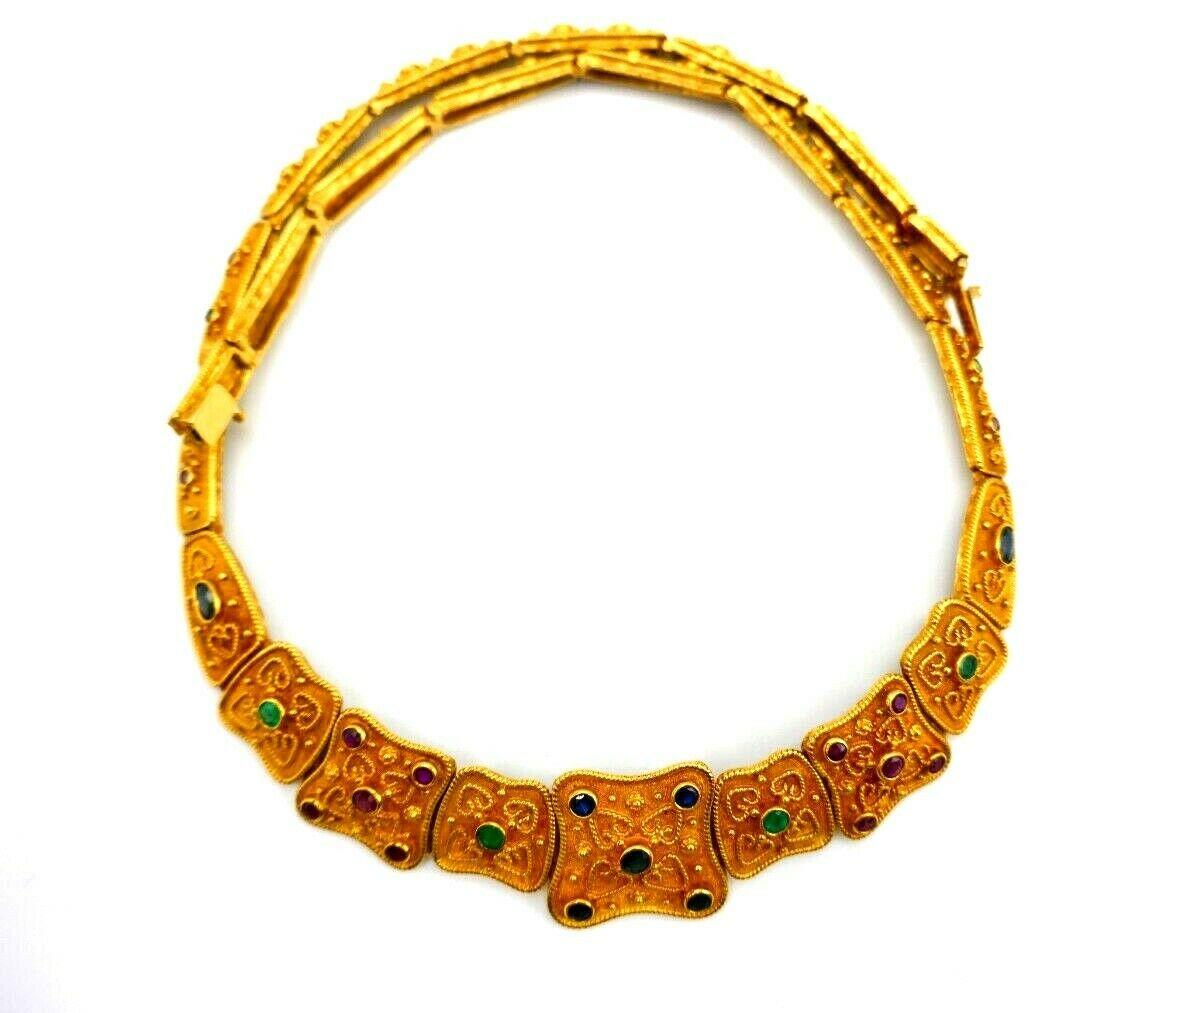 Vintage Textured Yellow Gold Gemstones Collar Necklace For Sale 1